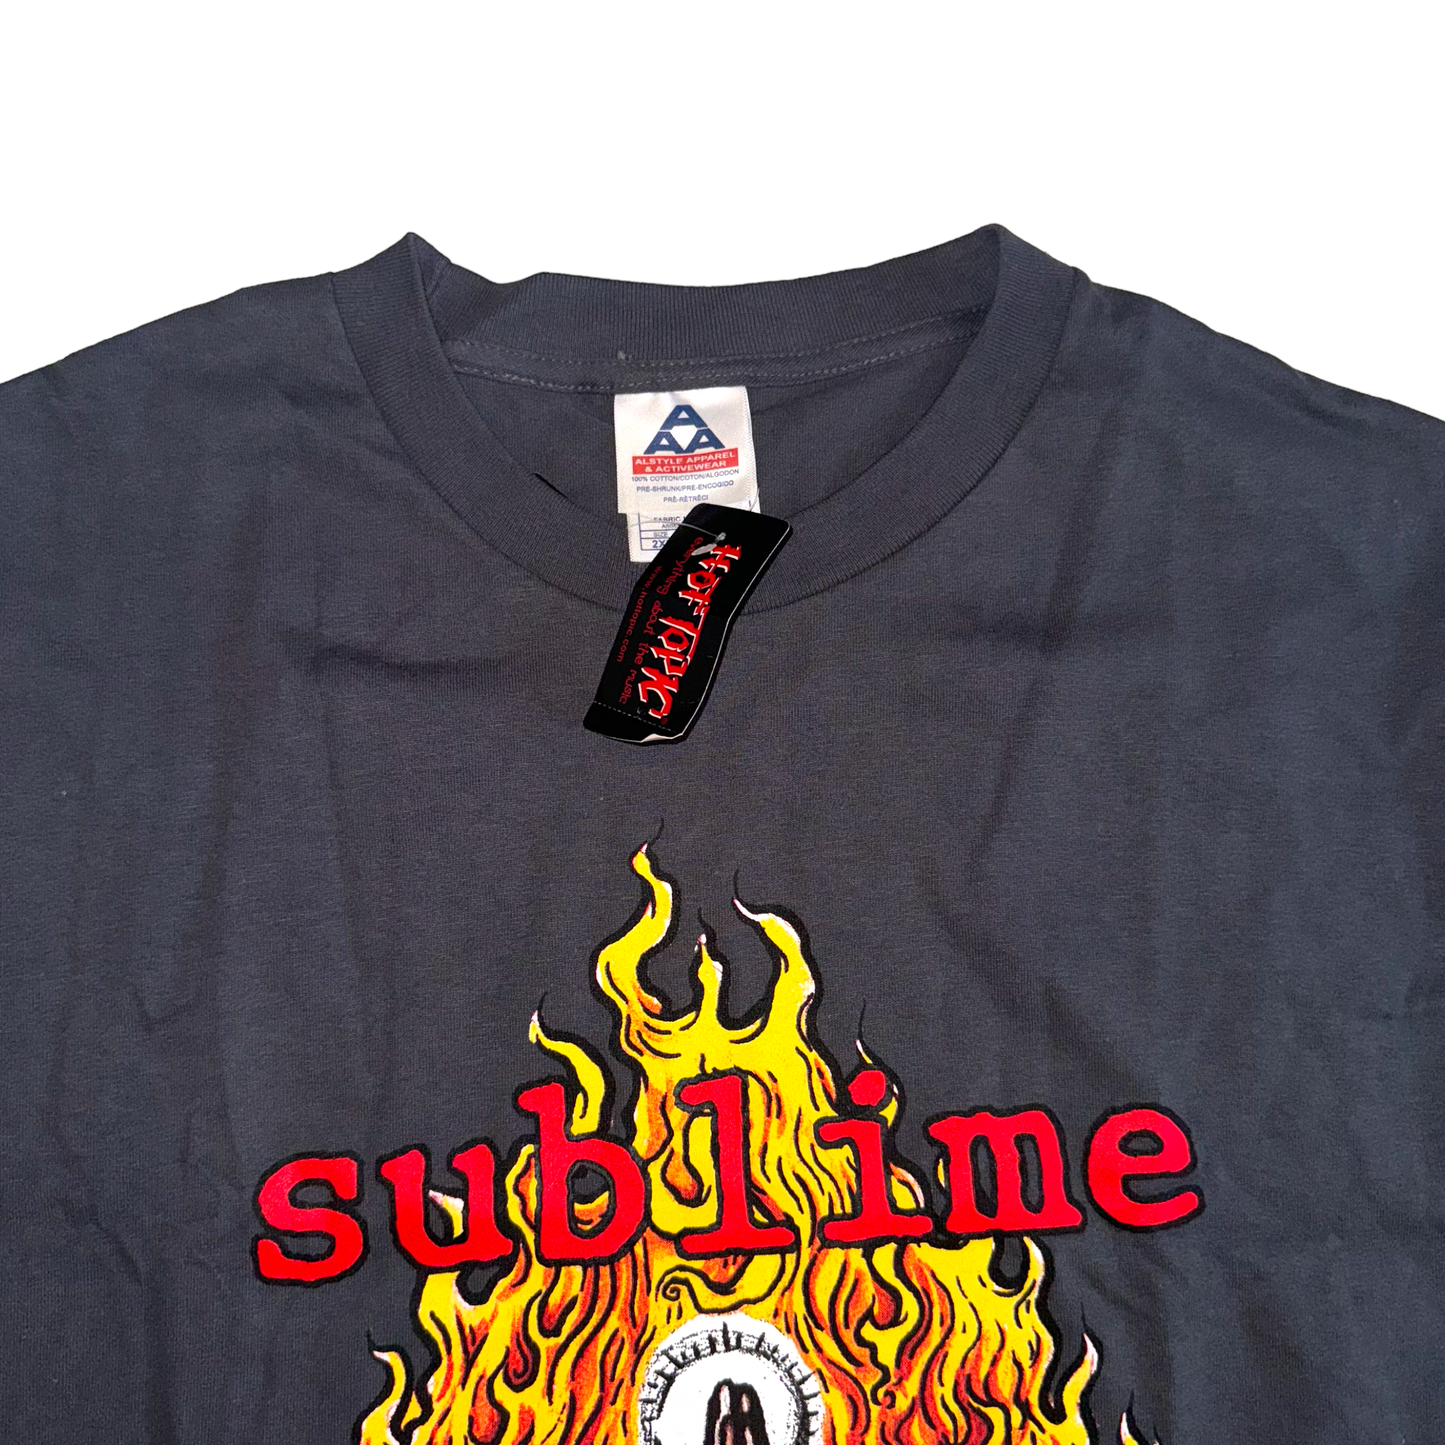 Hot Topic x AAA - Sublime 1997 Deadstock Vintage T-Shirt